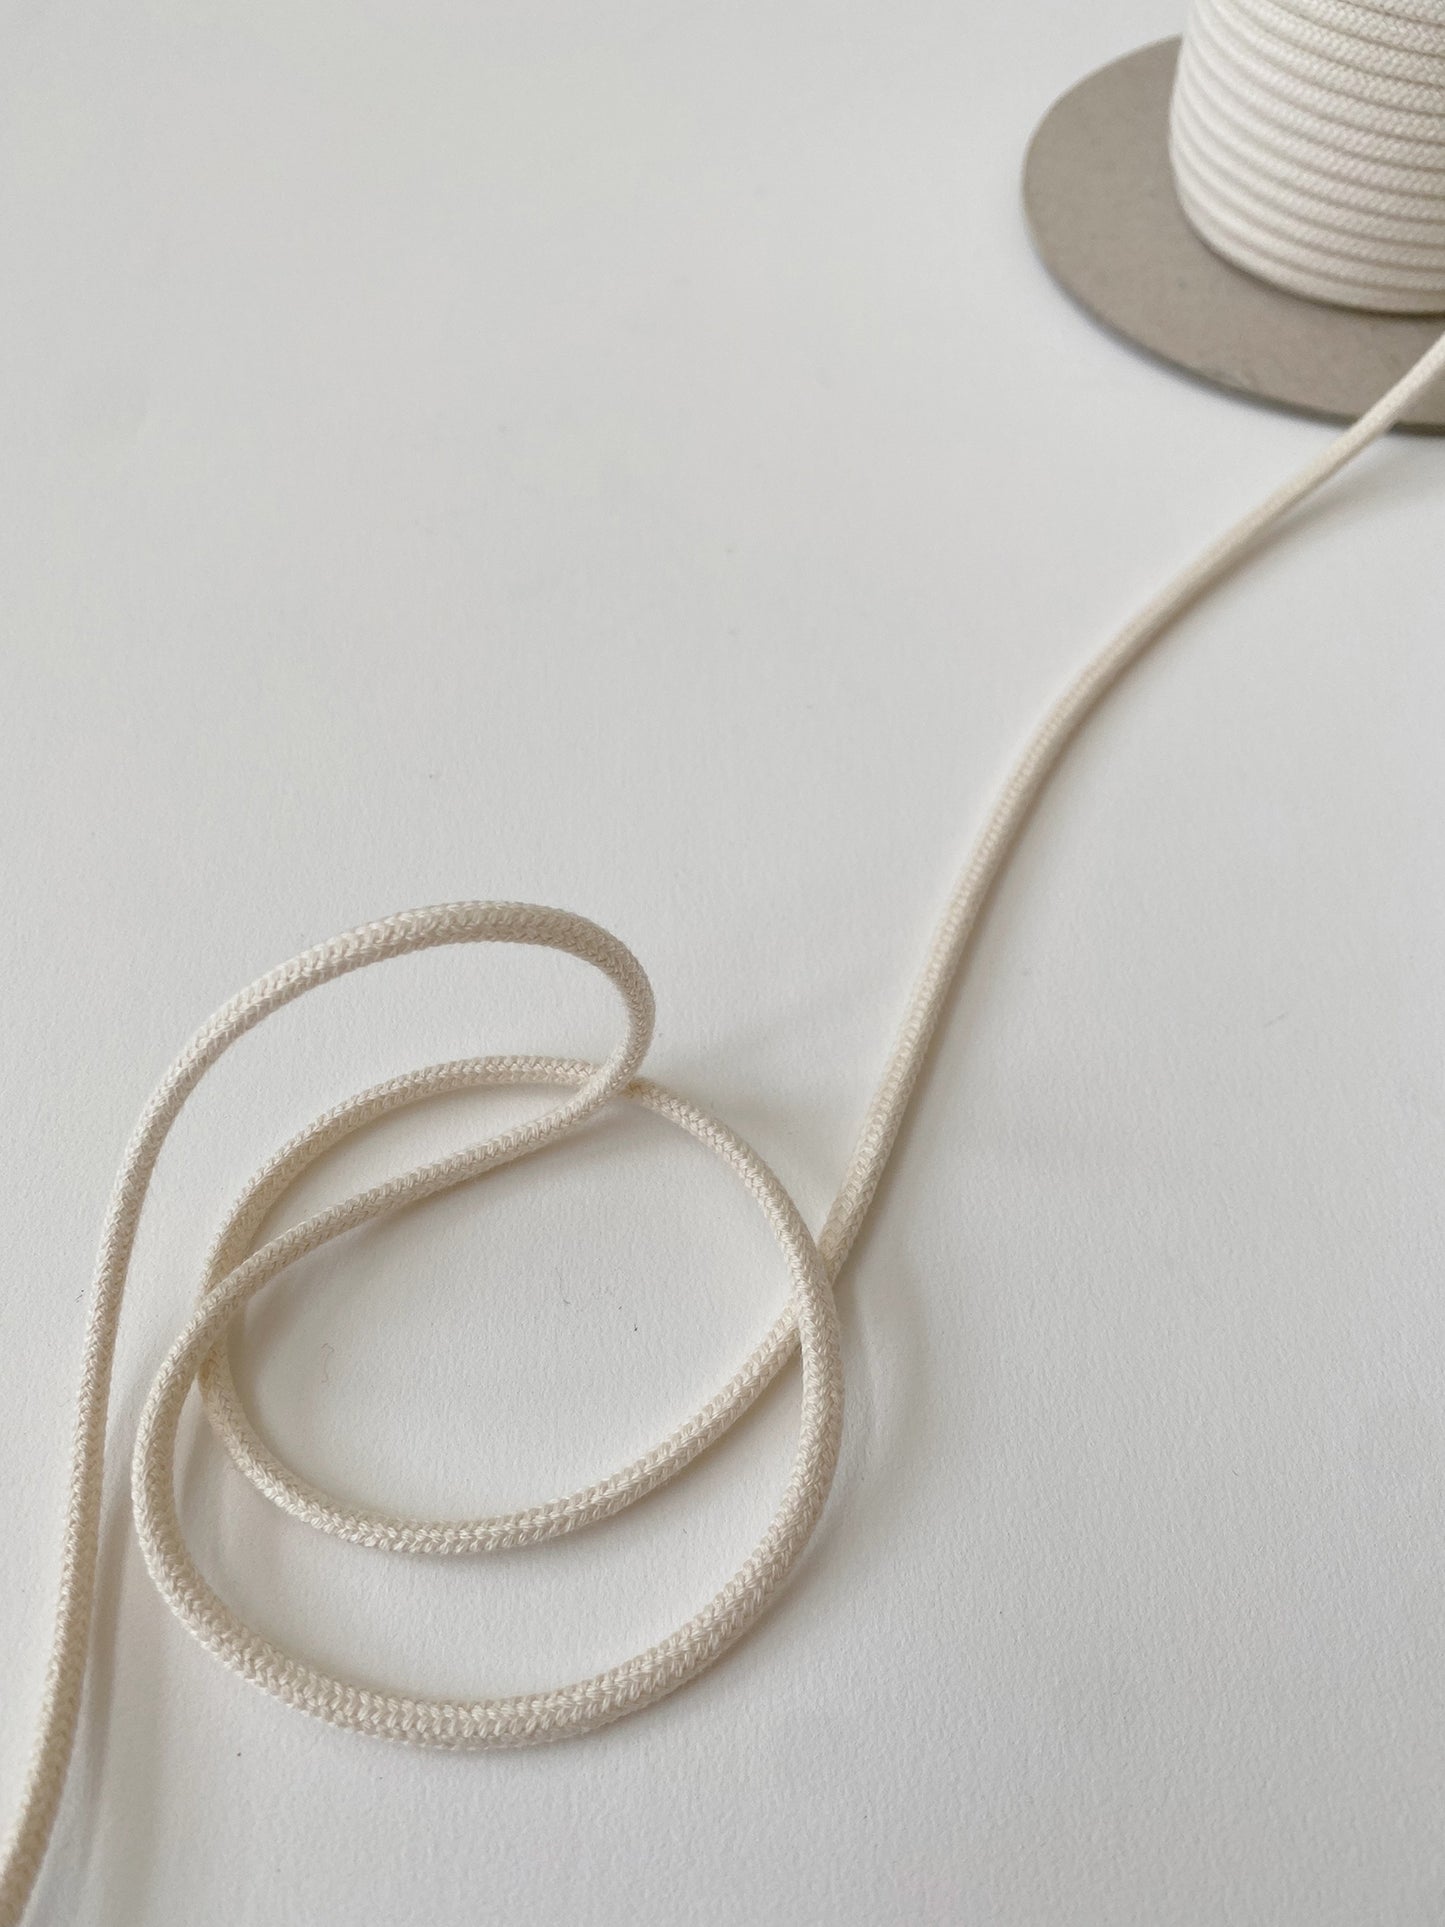 3mm Cord - 100% Cotton - Undyed